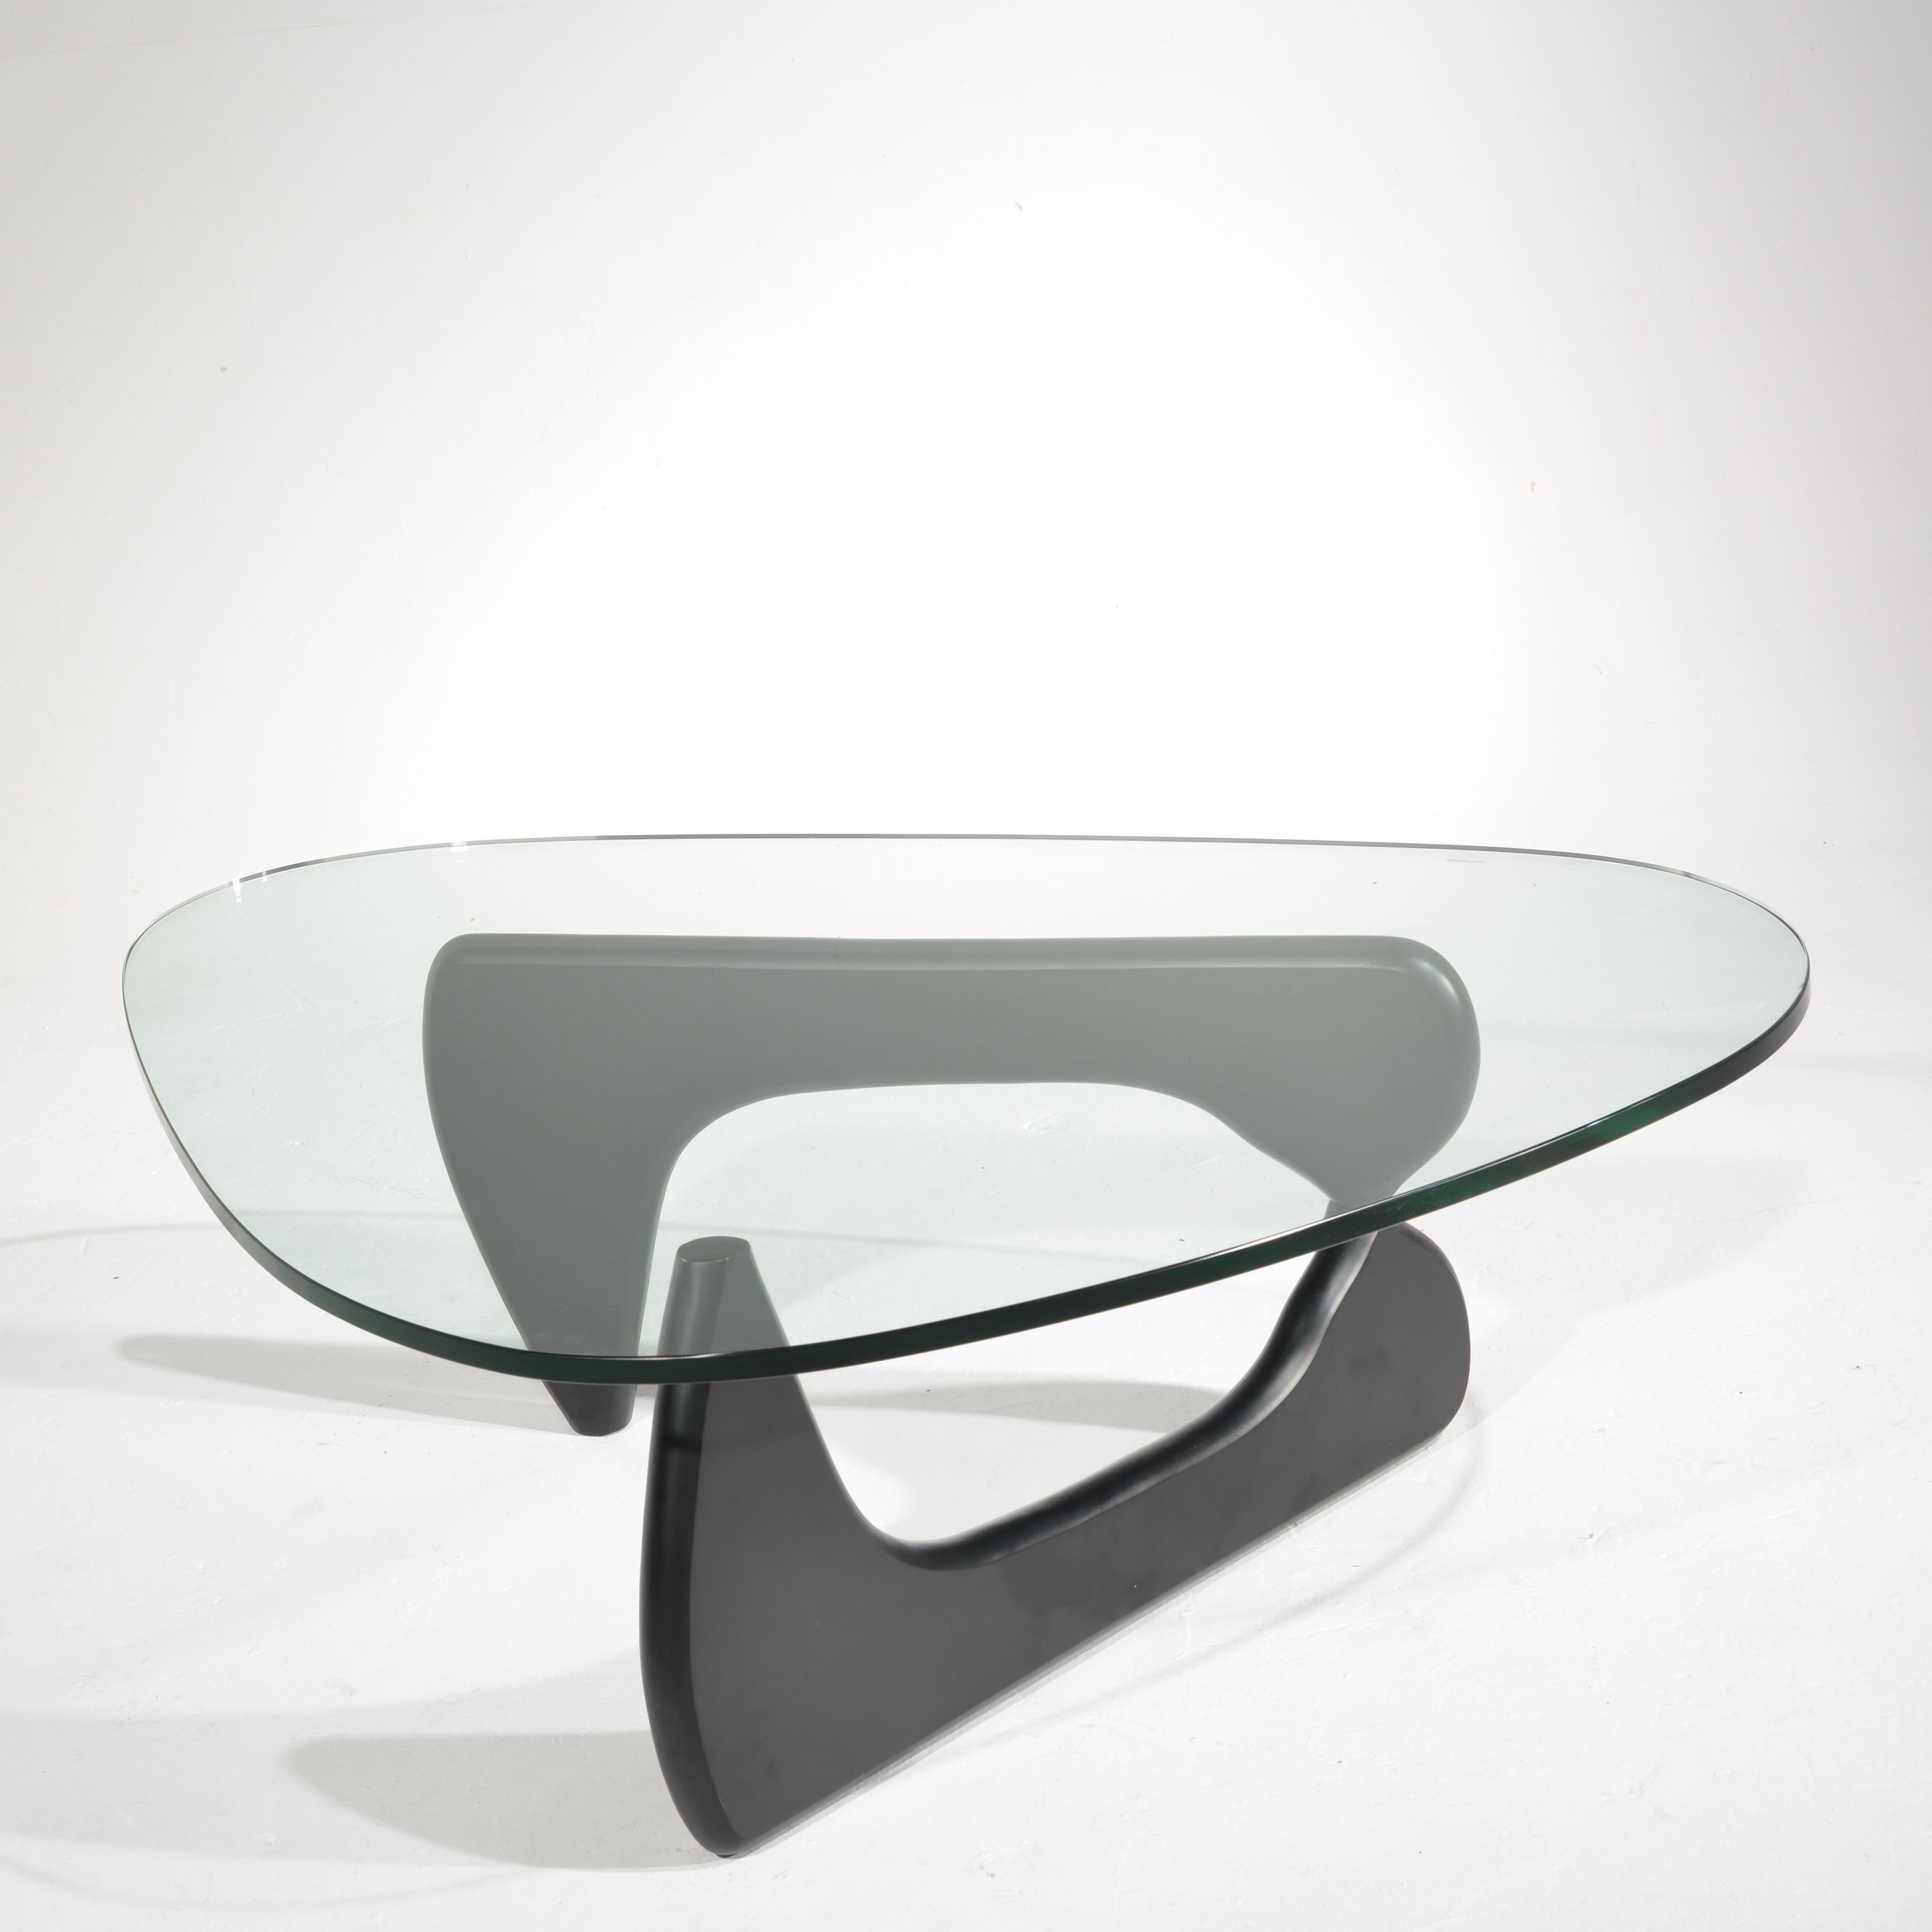 Isamu Noguchi designed coffee table with original glass top by Herman Miller.
An iconic midcentury design.